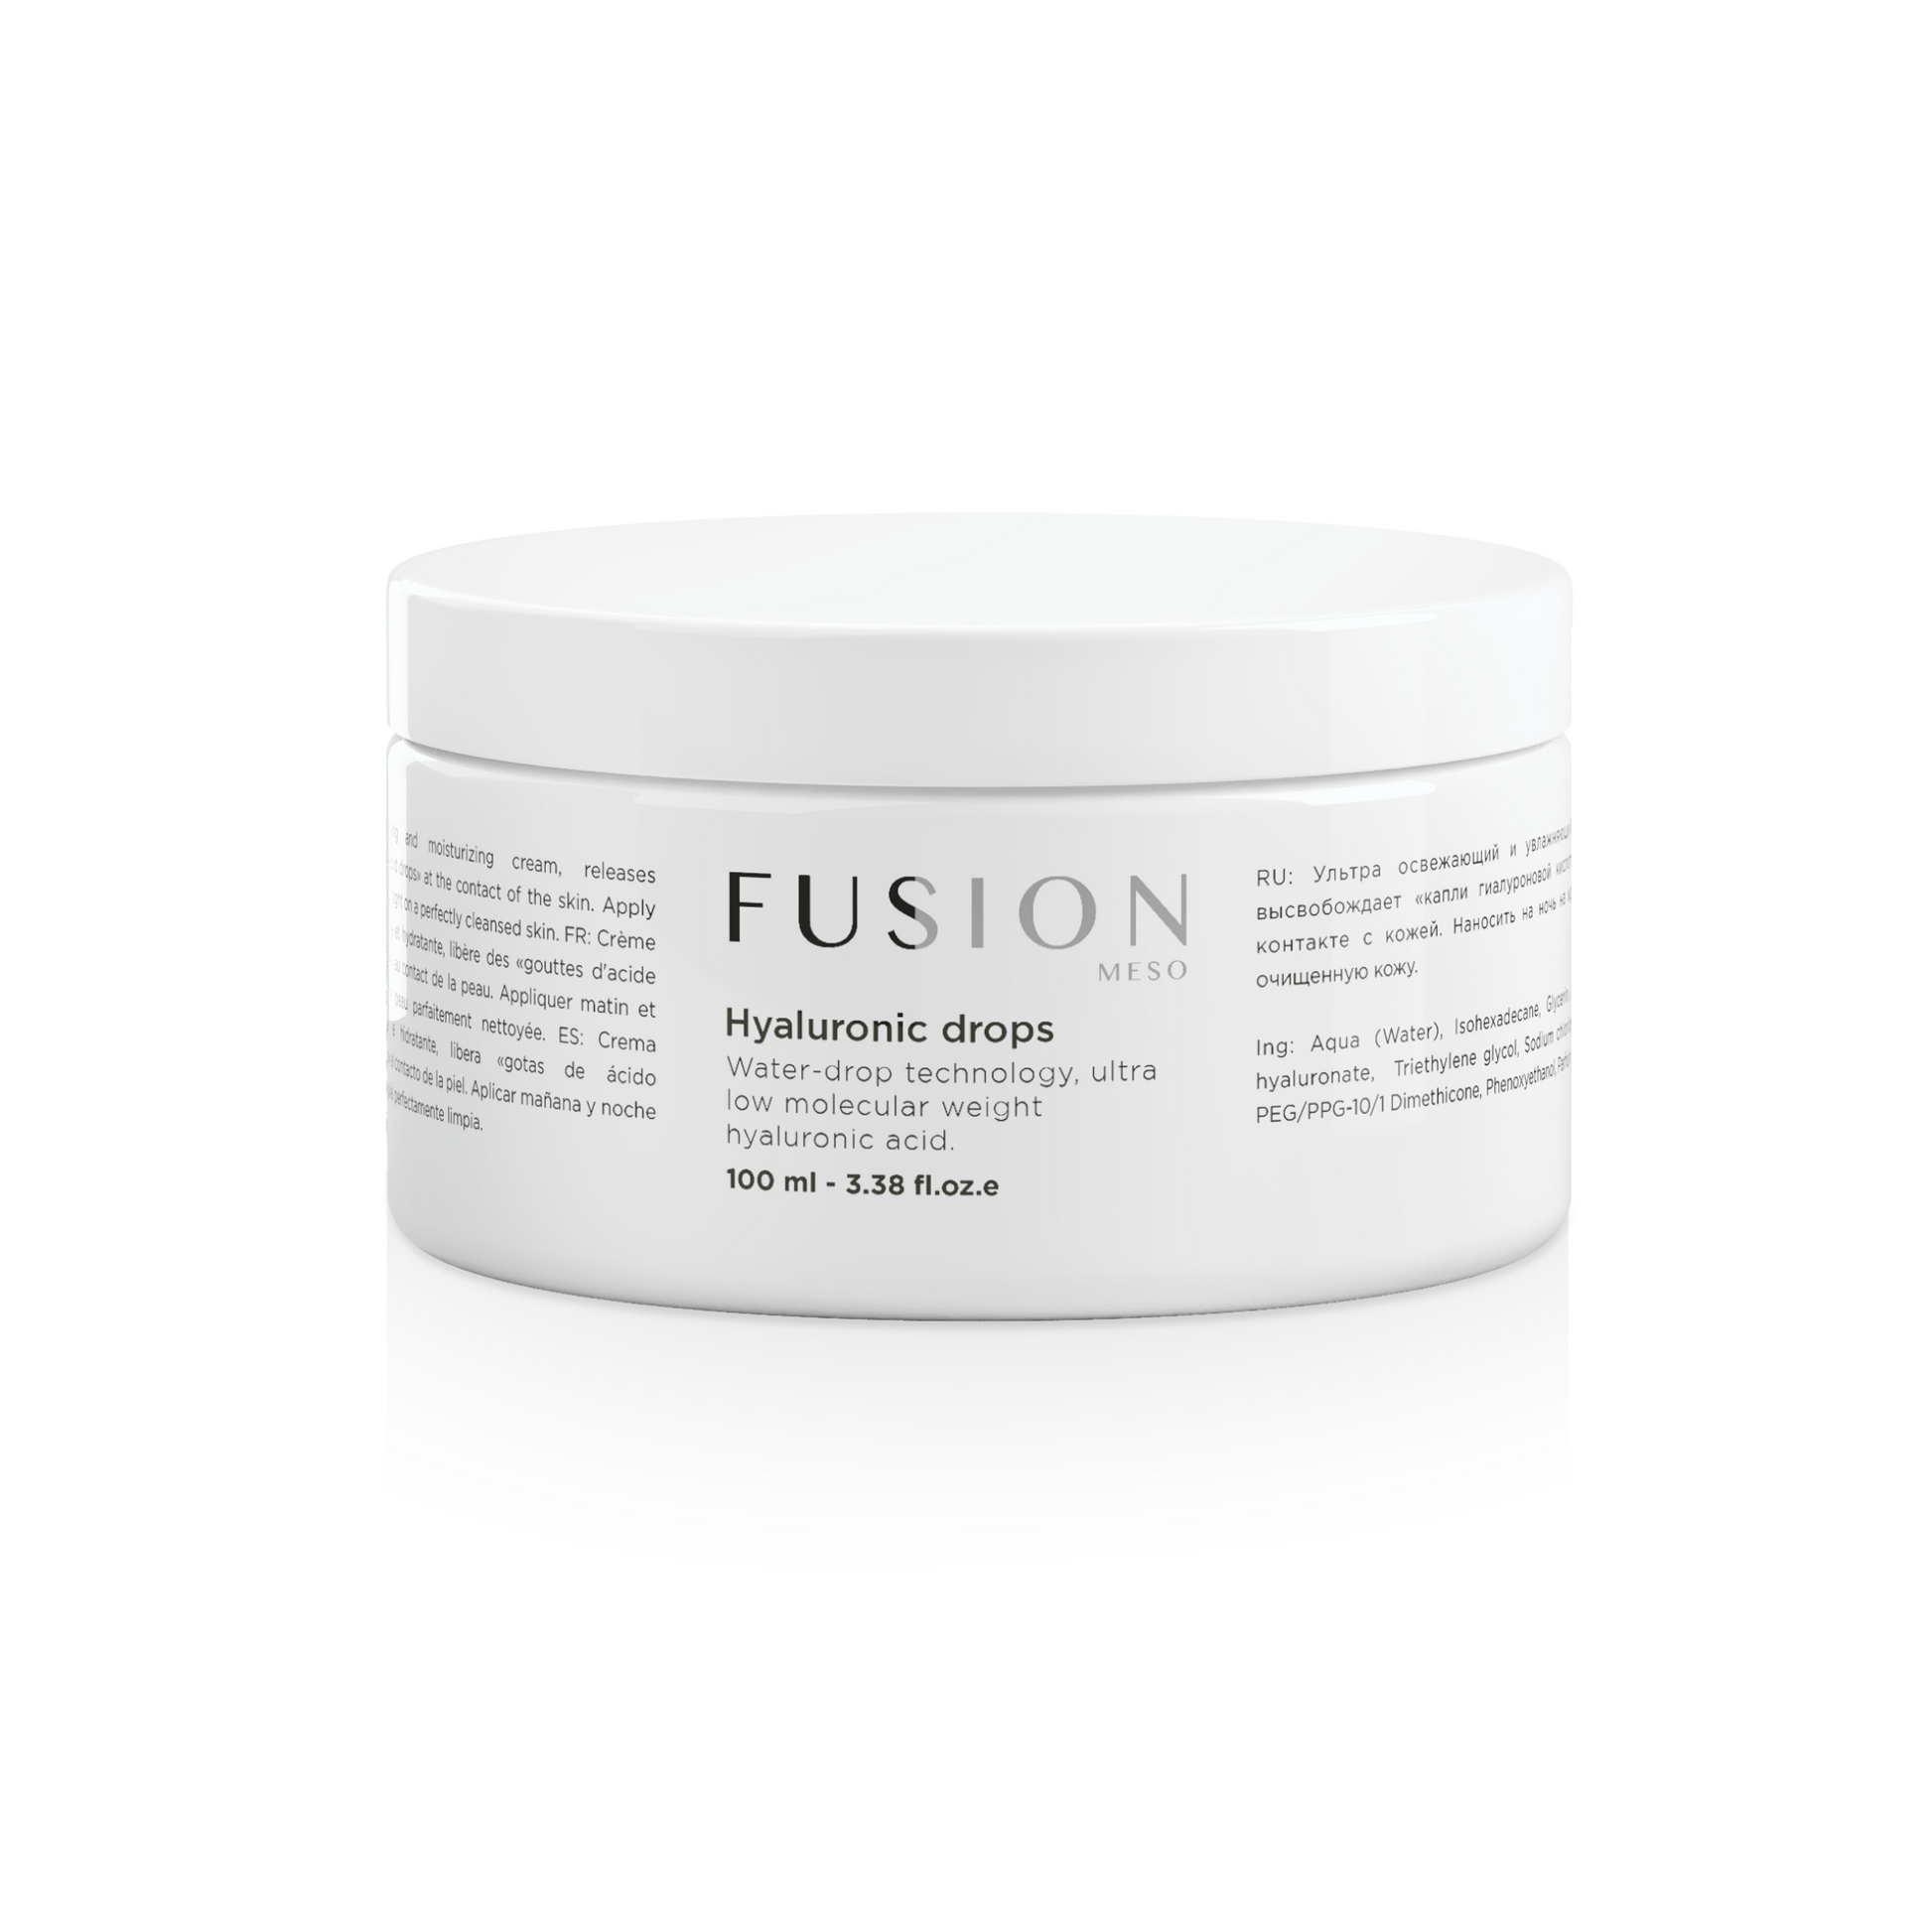 FUSION MESO: HYALURONIC DROPS